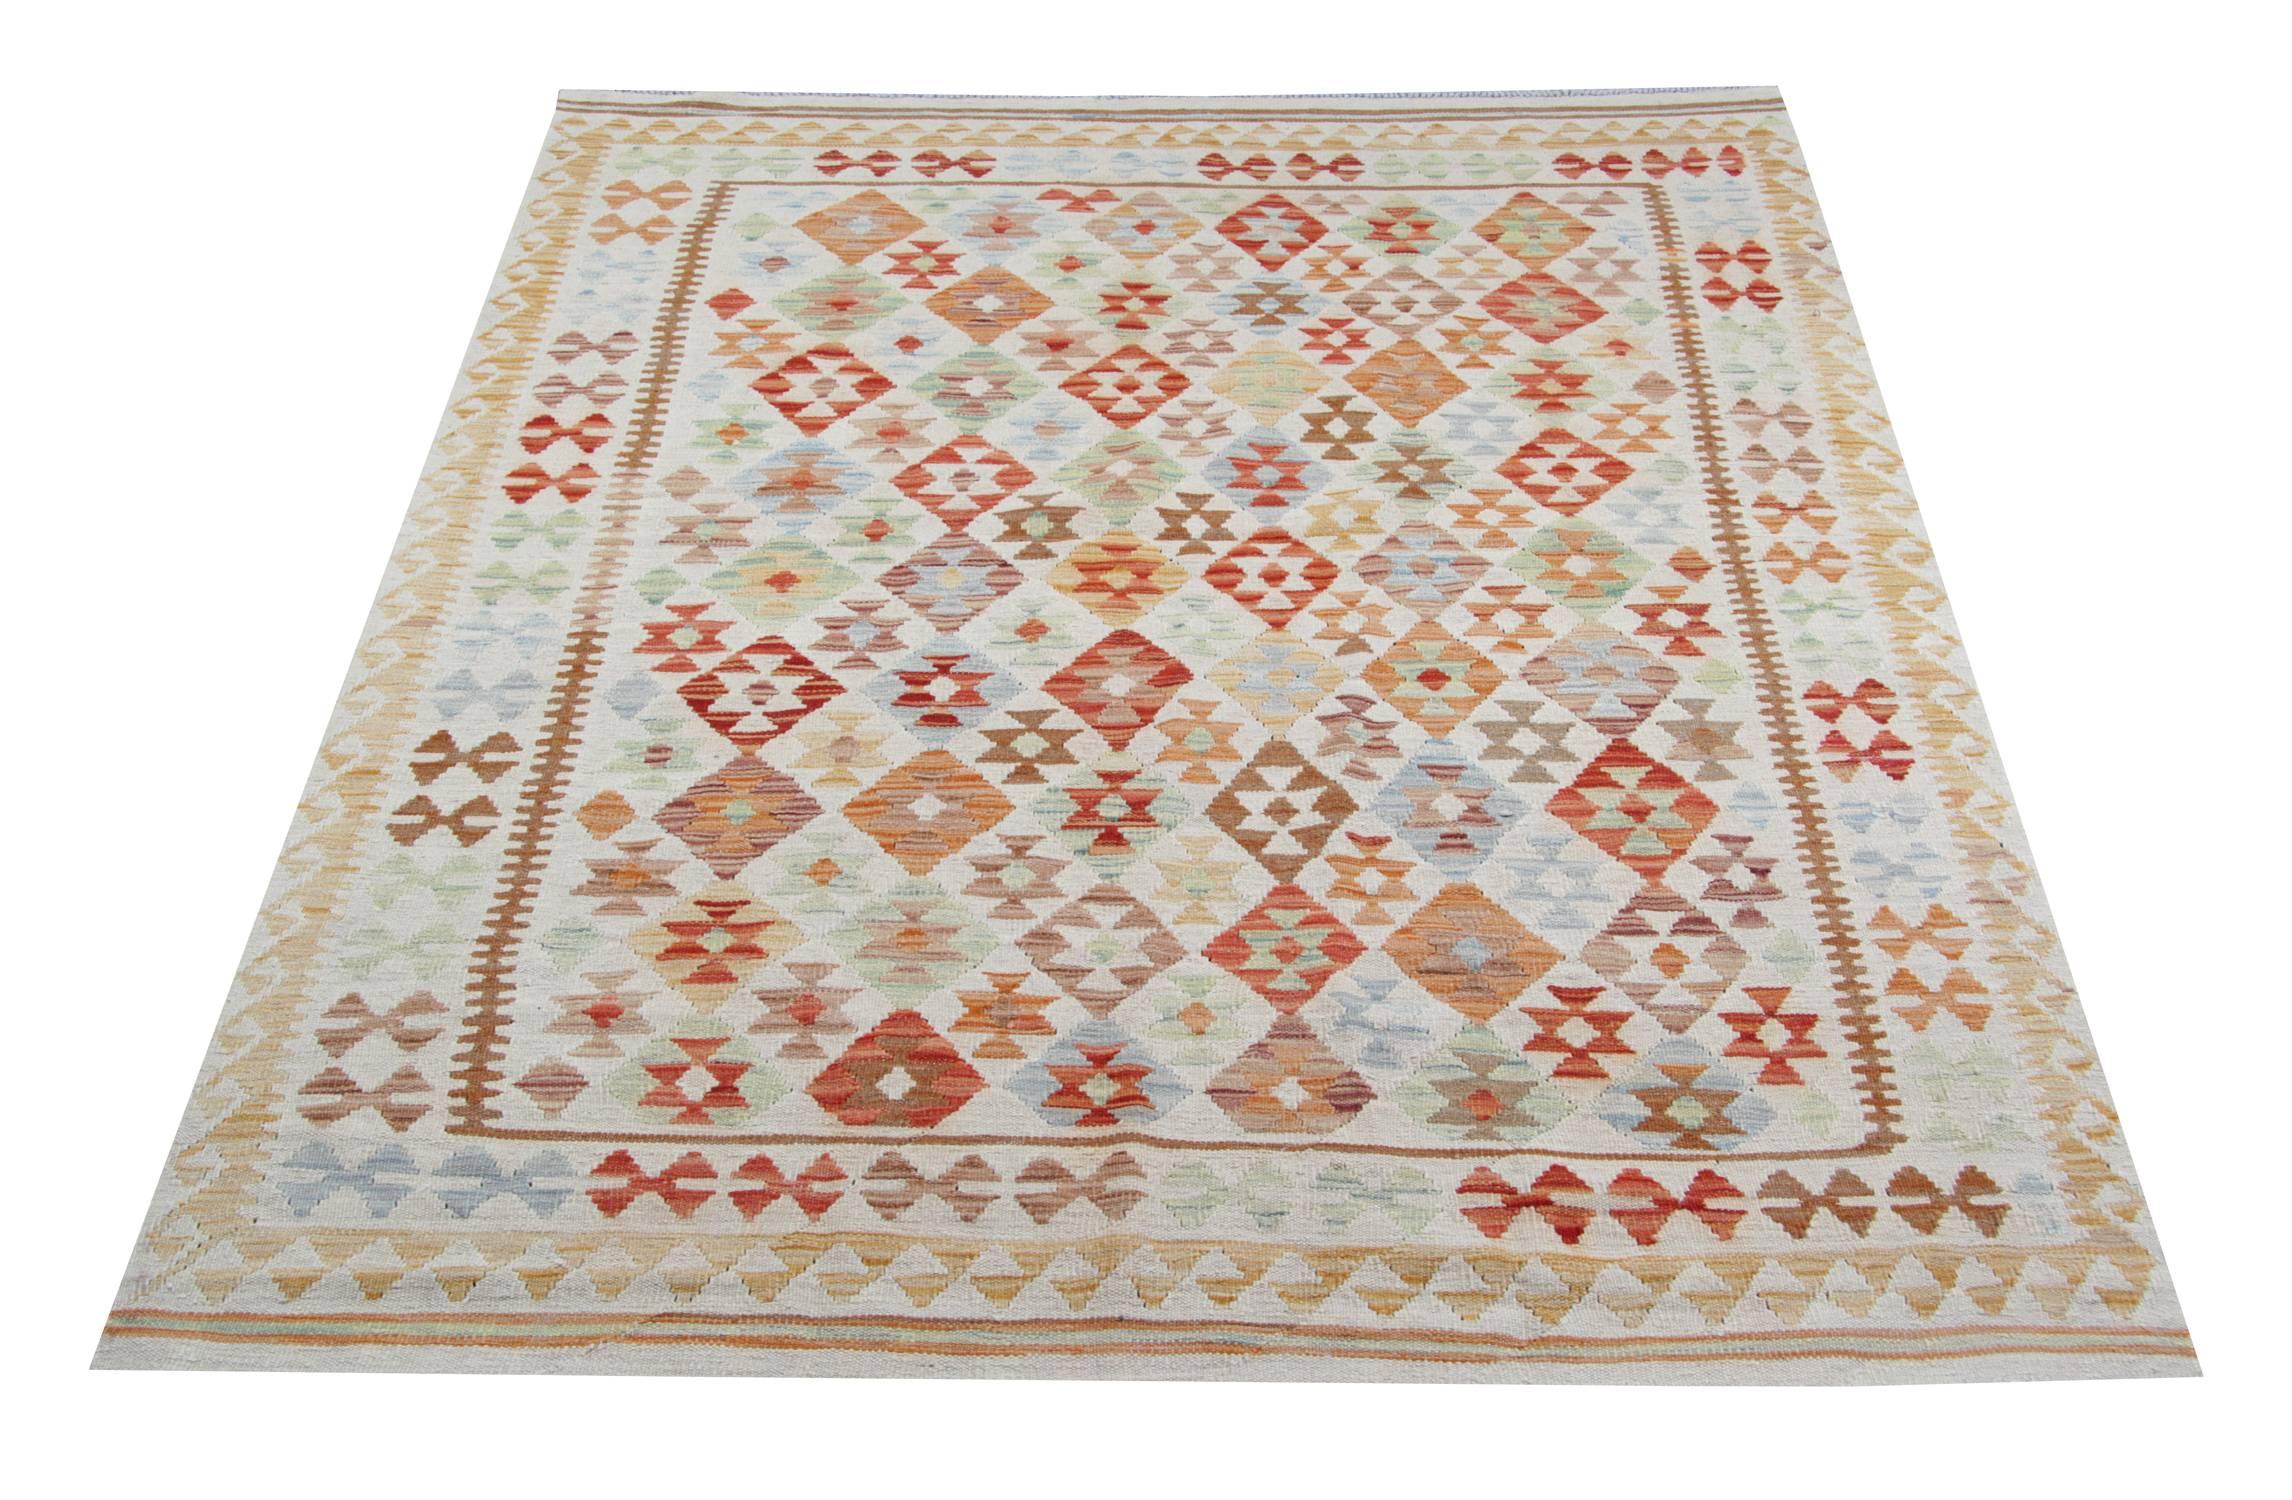 This geometric rug is a patterned rugs Kilim handmade in the North of Afghanistan by Uzbek and Turkmen tribes. The materials on these Afghan rugs used are wool and cotton, only organic dyes have been used. This cream rug shows geometric rug designs